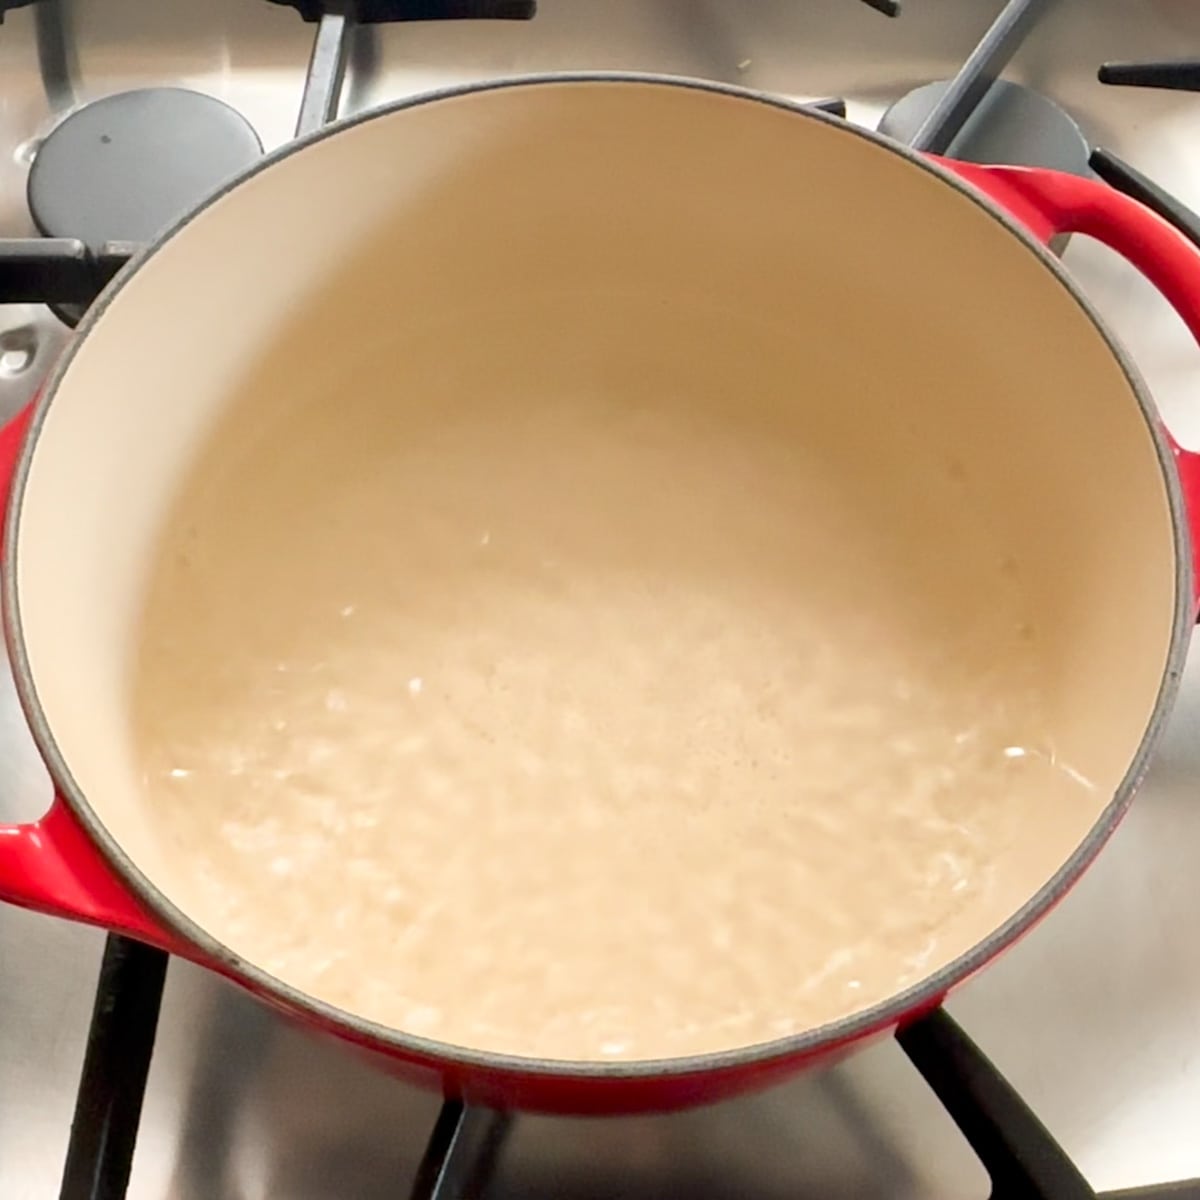 Boil water into a pot